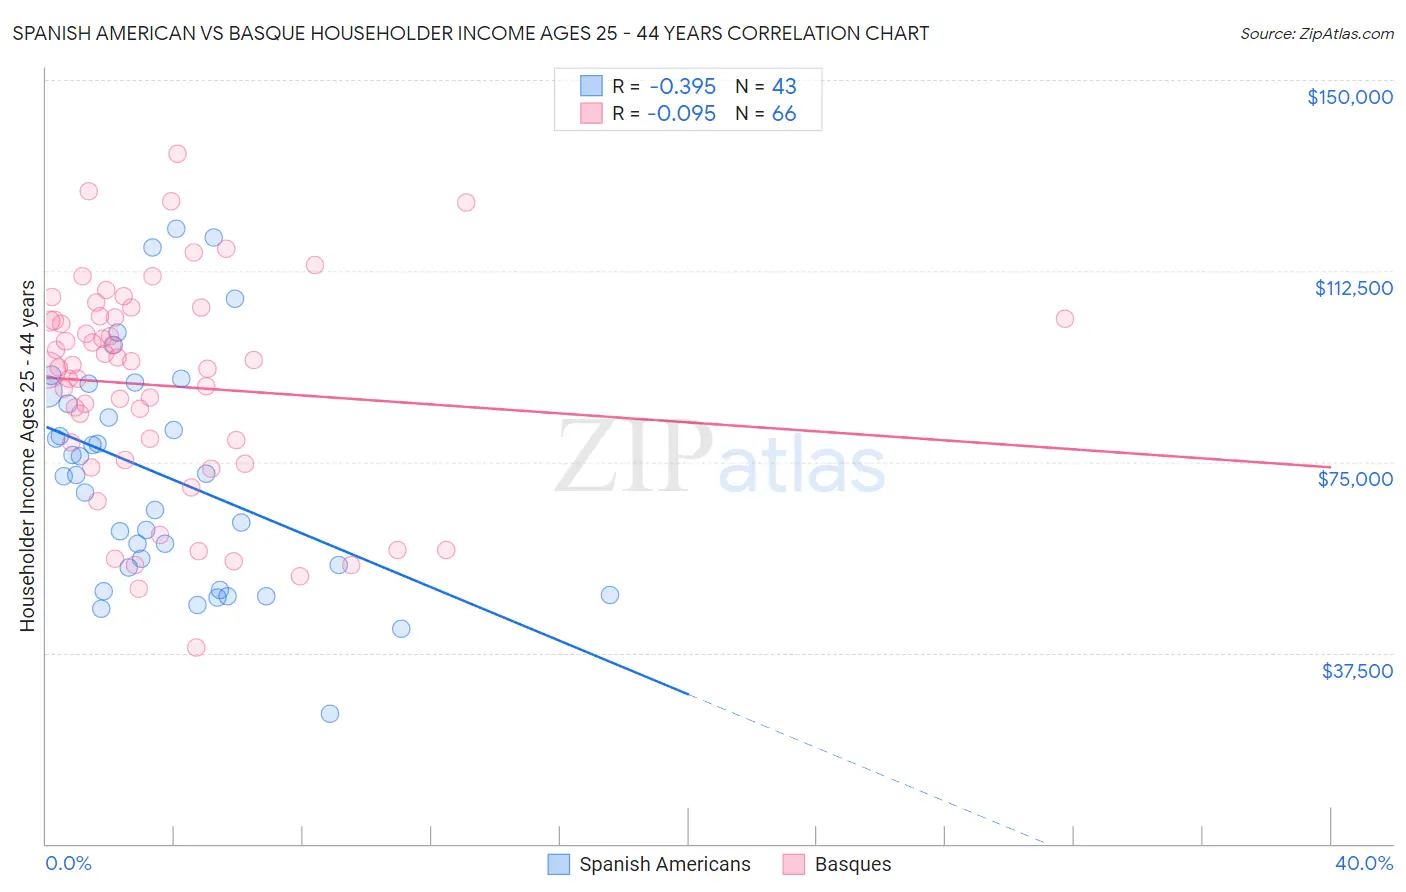 Spanish American vs Basque Householder Income Ages 25 - 44 years